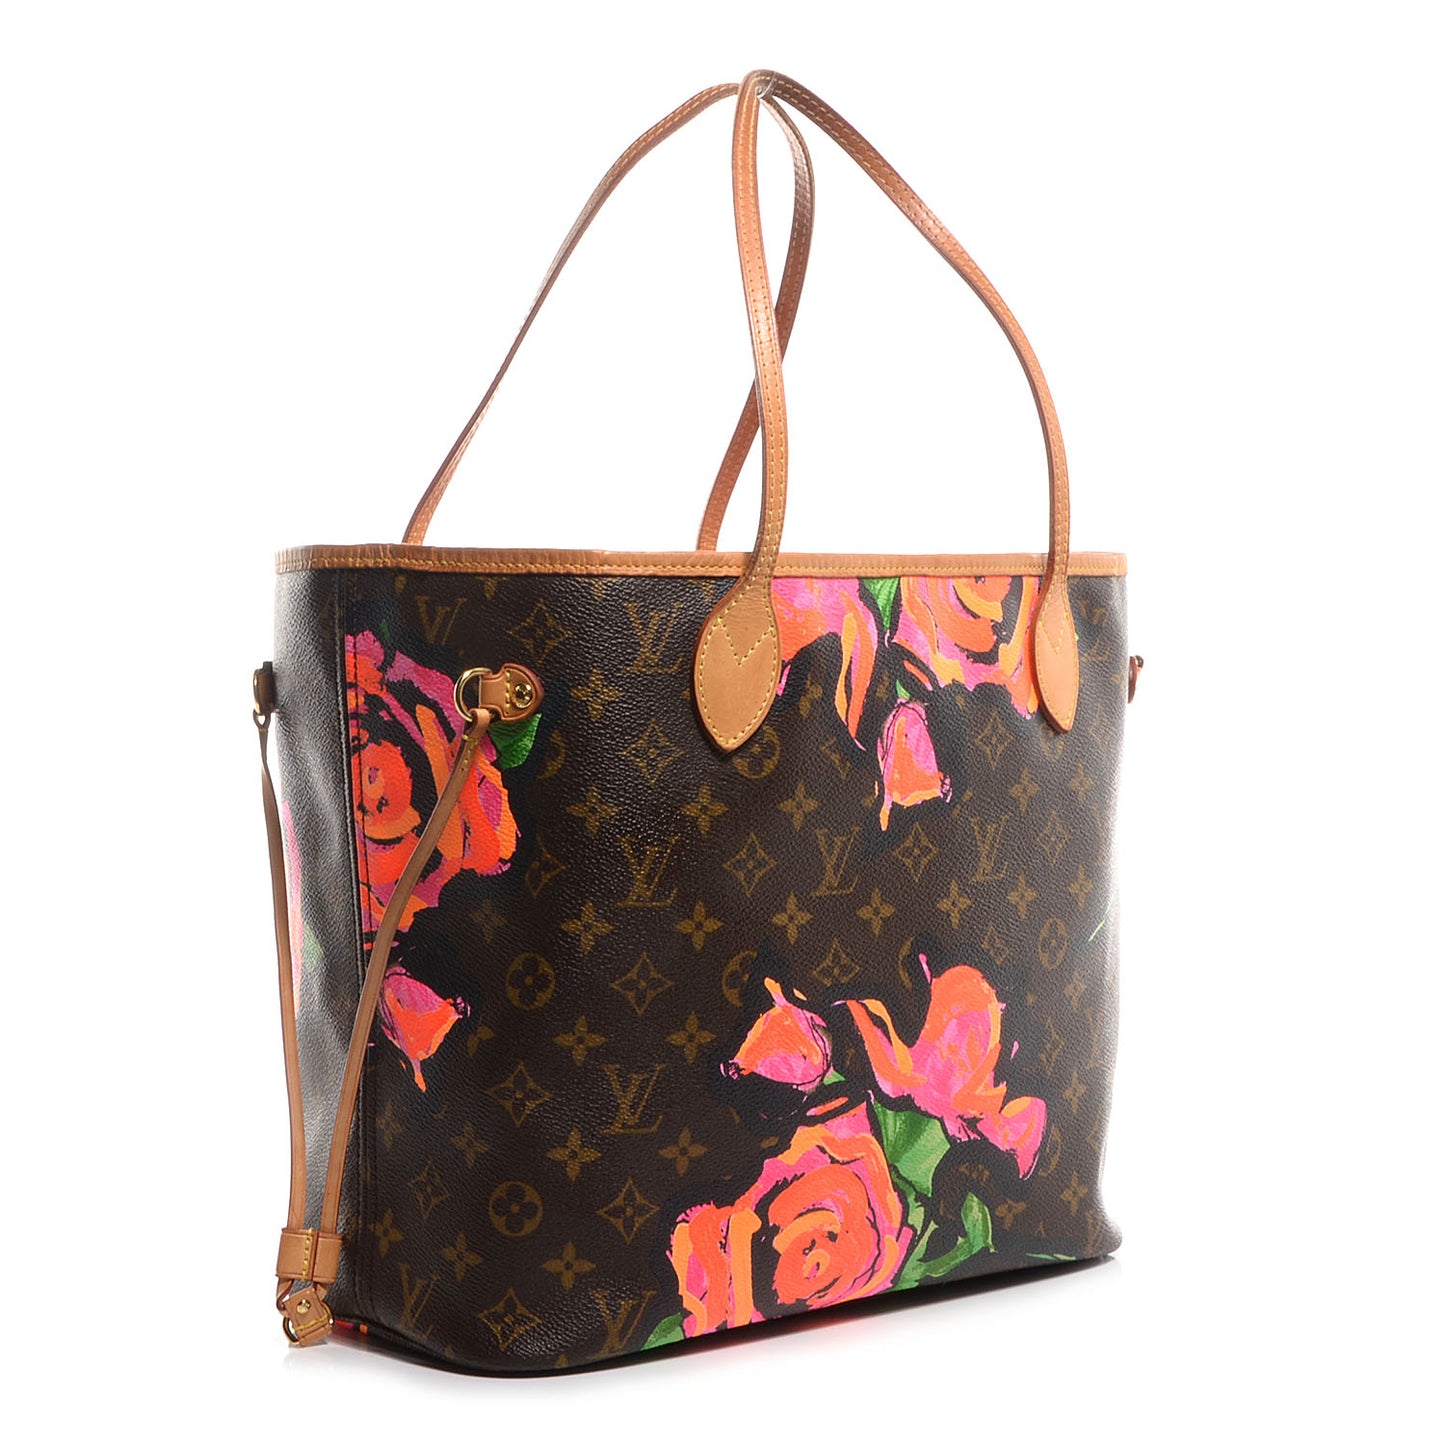 27. Louis Vuitton Stephen Sprouse Neverfull Floral MM- $299